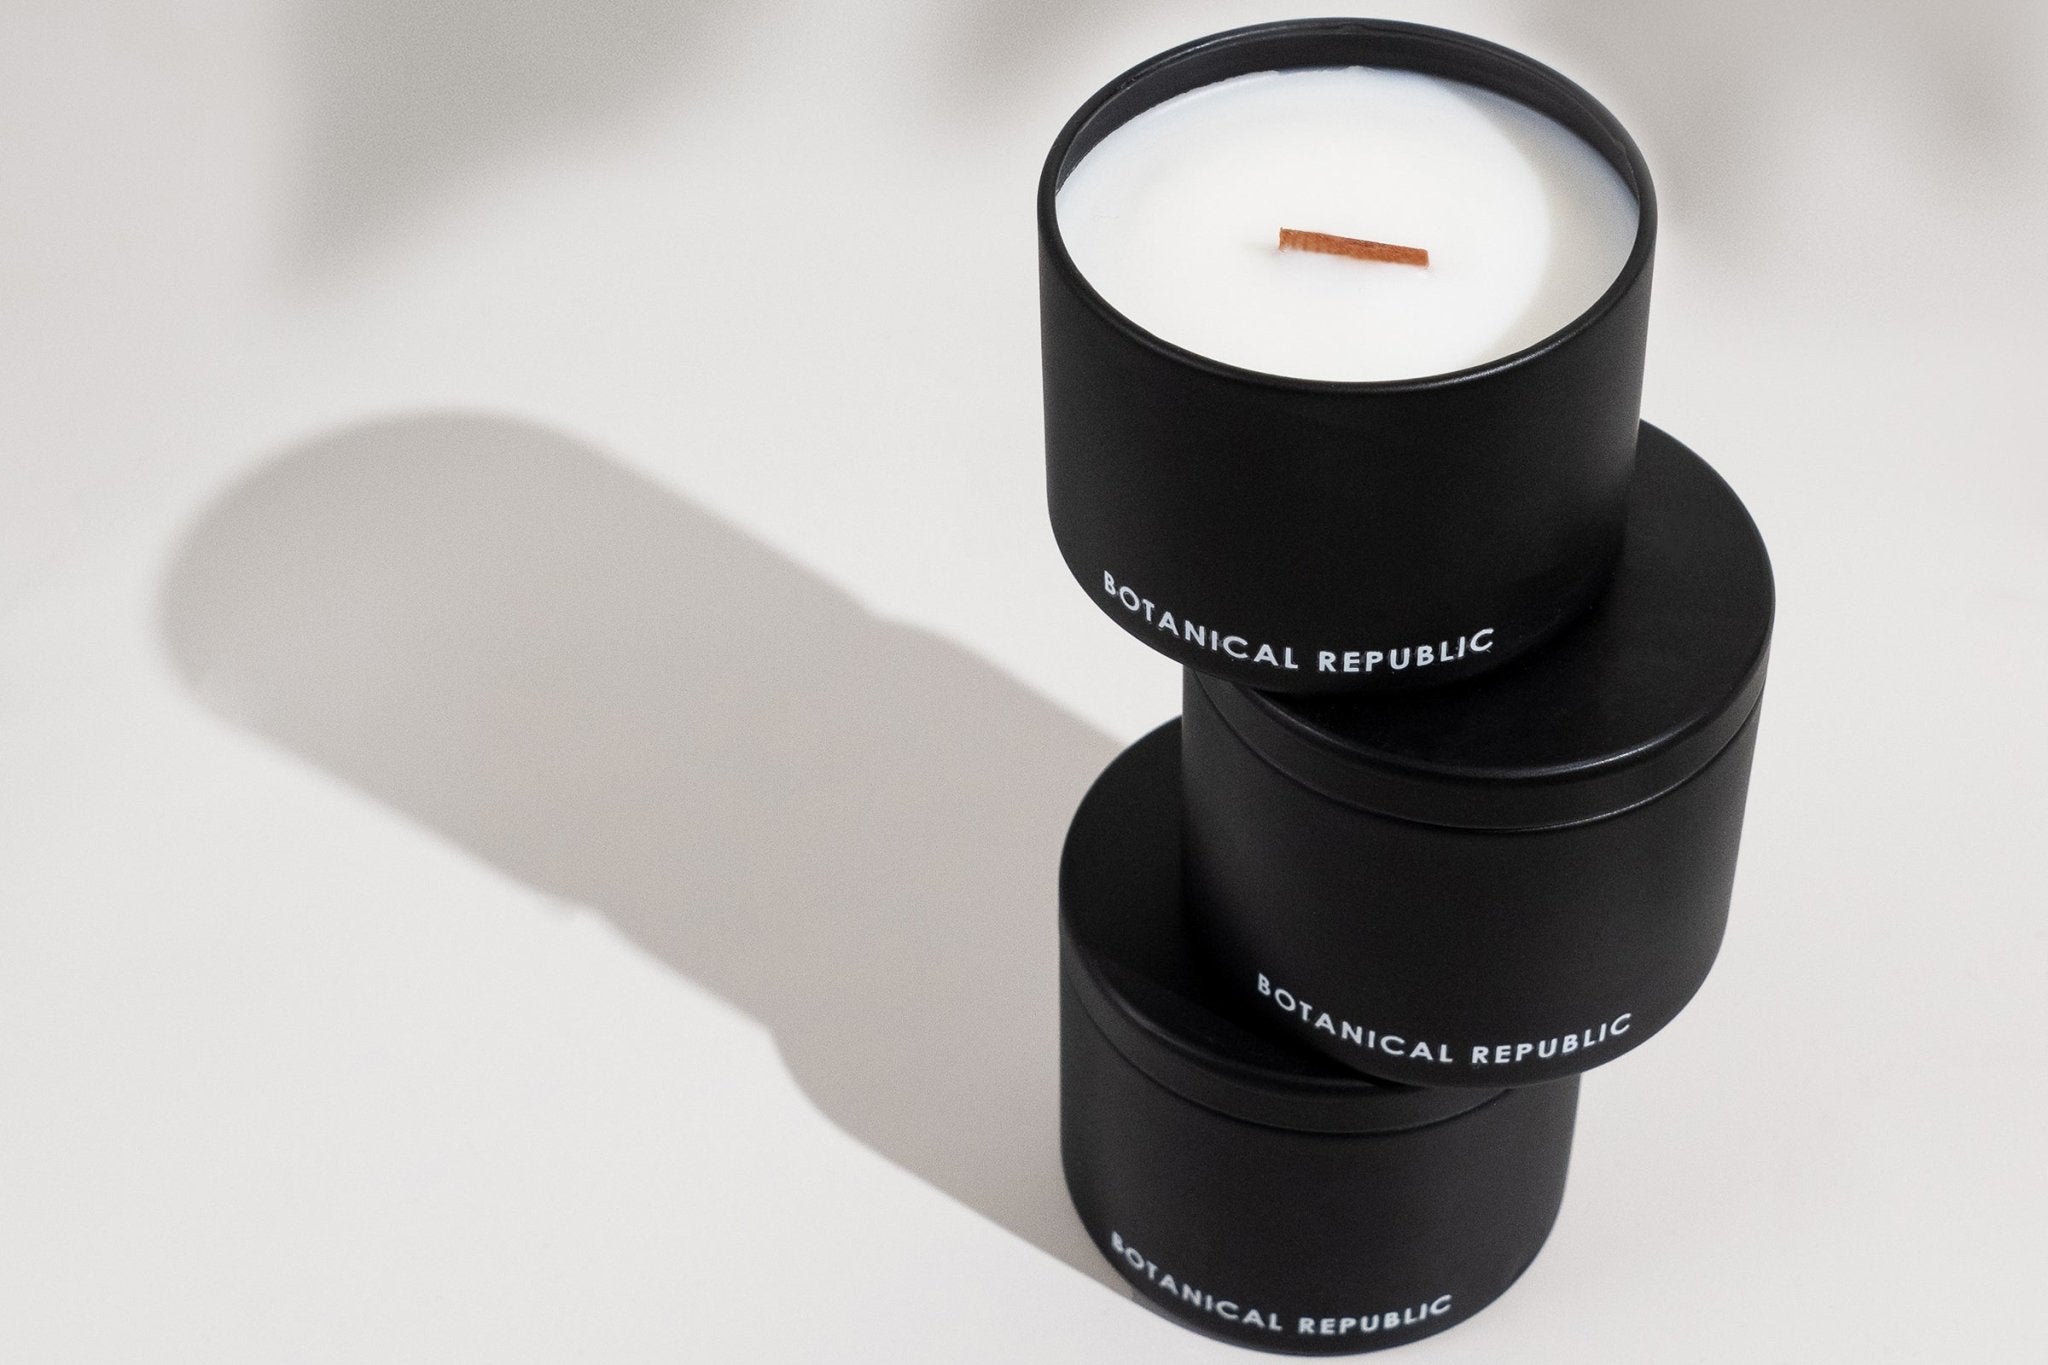 Barahona Signature Scented Candle, Luxury Candles Inspired by the  Dominican Republic